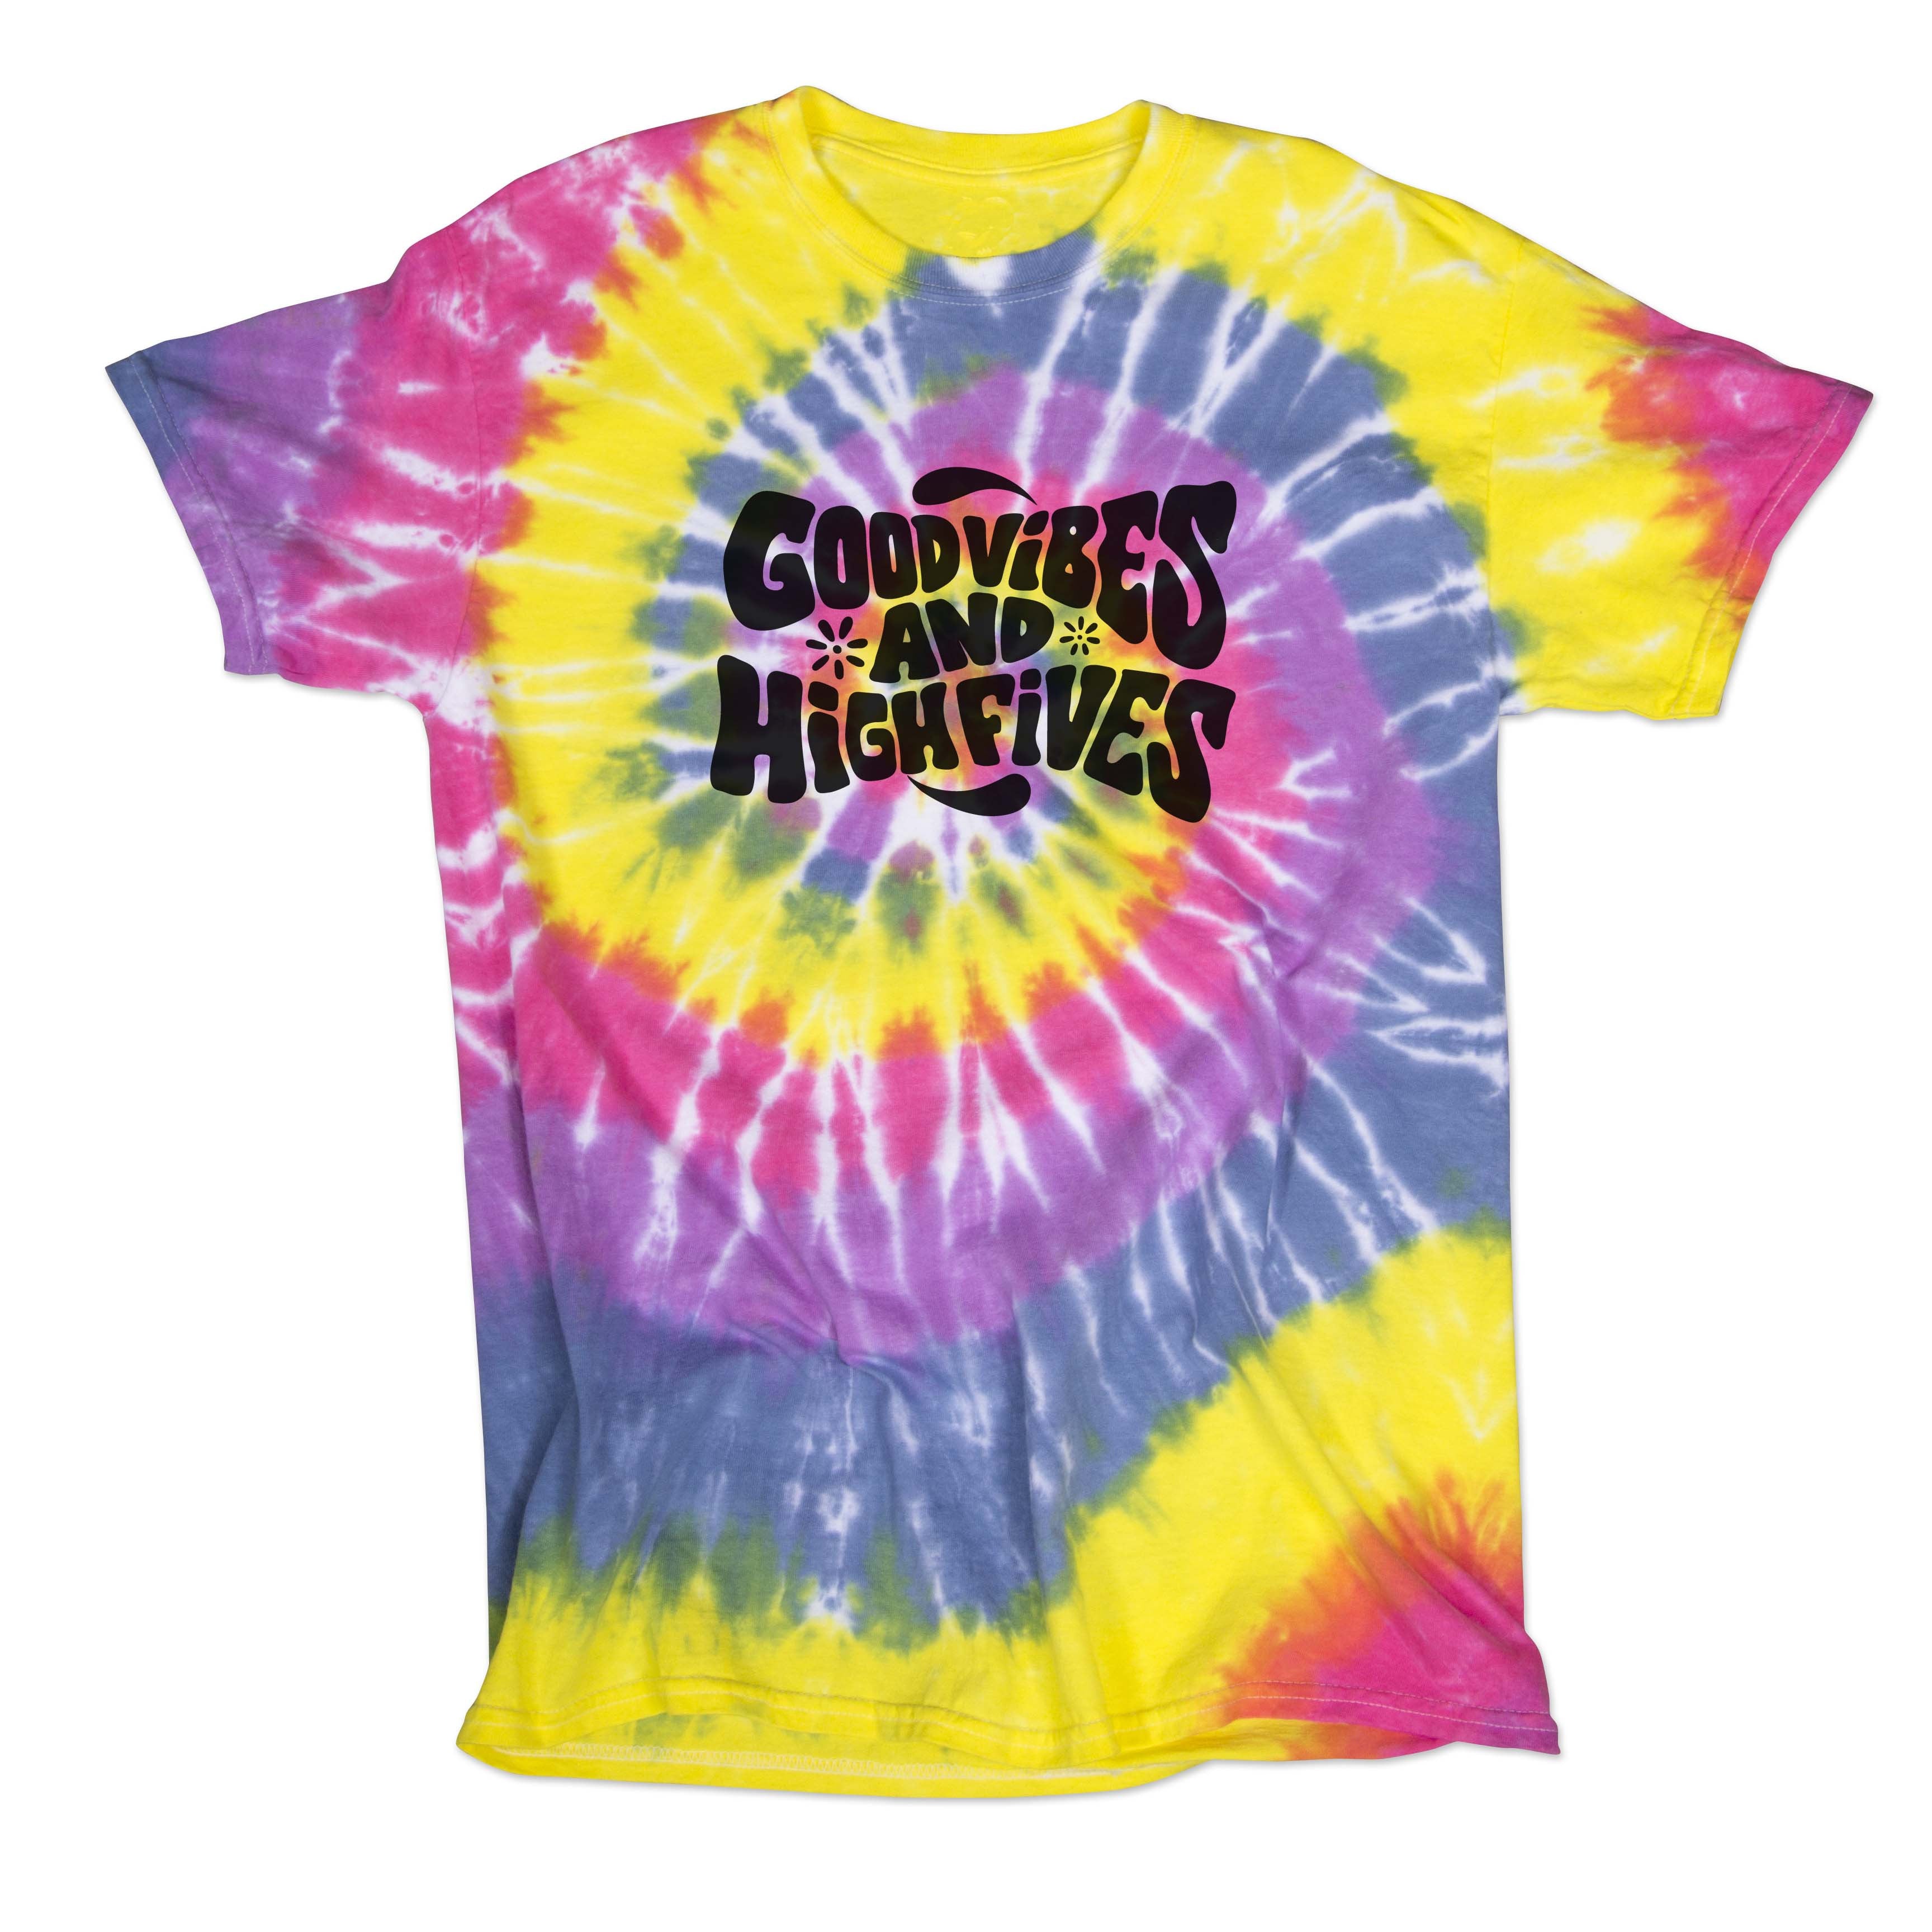 Good Vibes and High Fives Pastel Tie-Dye Shirt